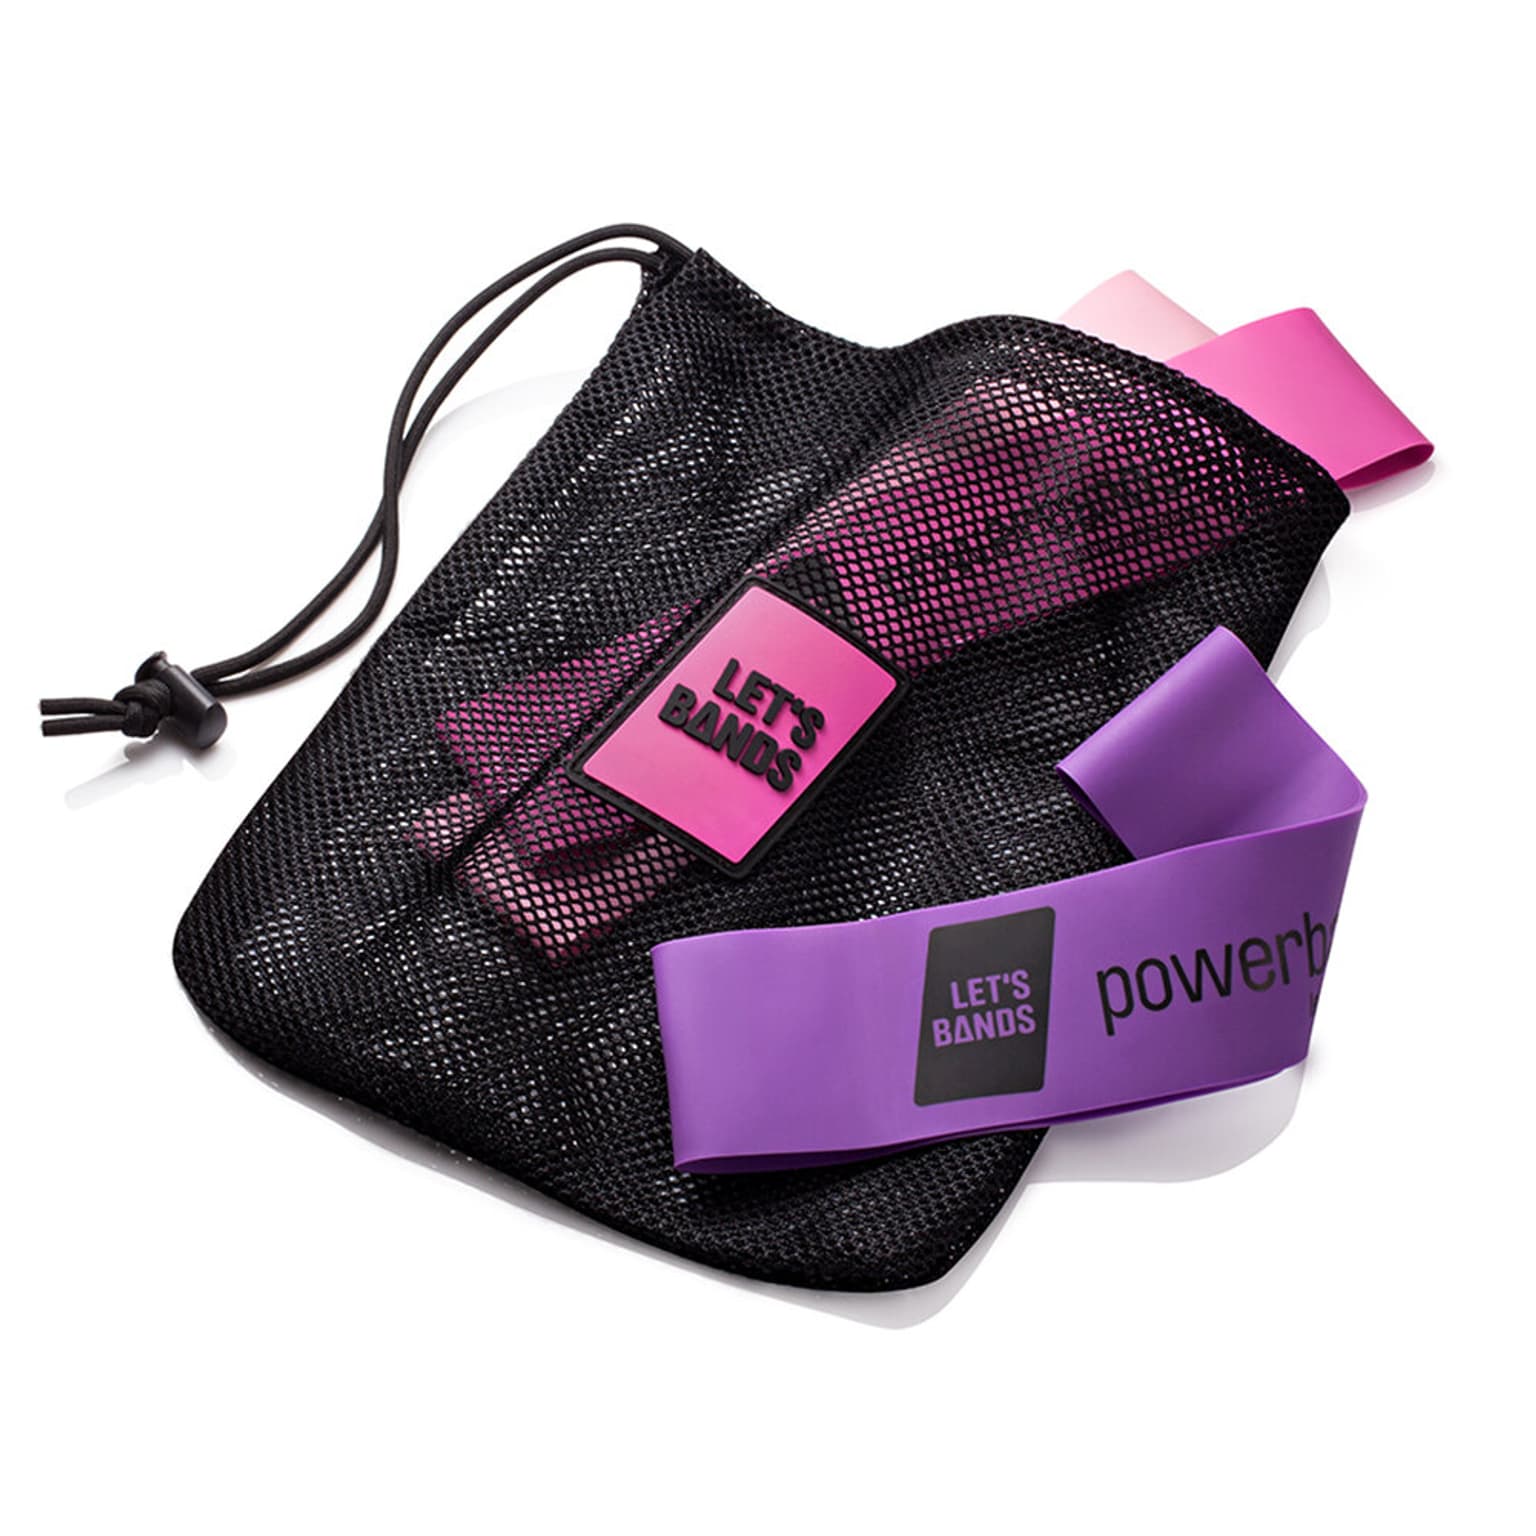 Let's Bands Let's Bands Powerbands Set Lady Elastico fitness 3